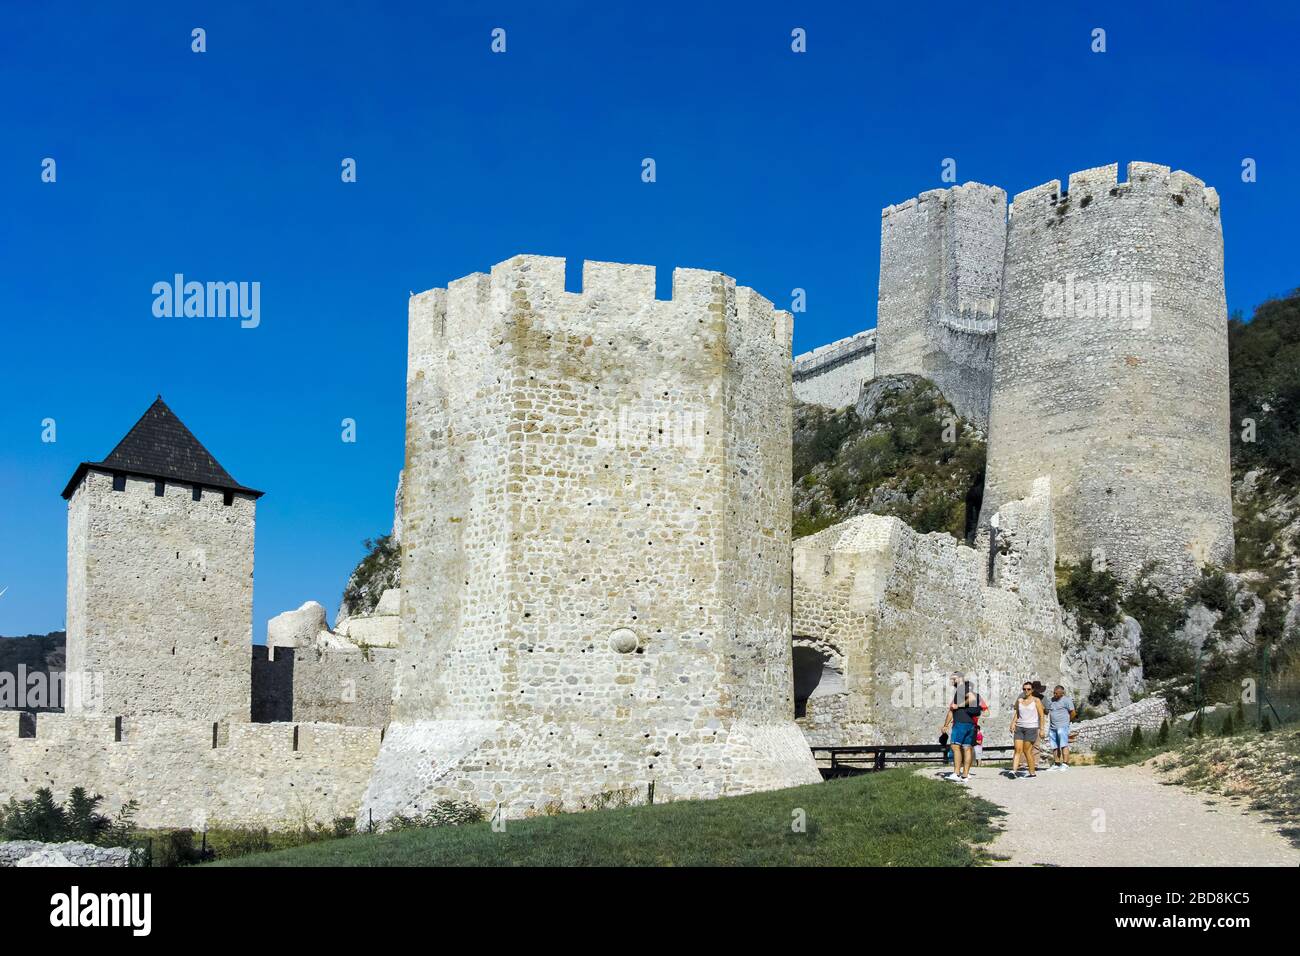 GOLUBAC, SERBIA - AUGUST 11, 2019: Golubac Fortress -  medieval fortified town on the south side of the Danube River, Serbia Stock Photo